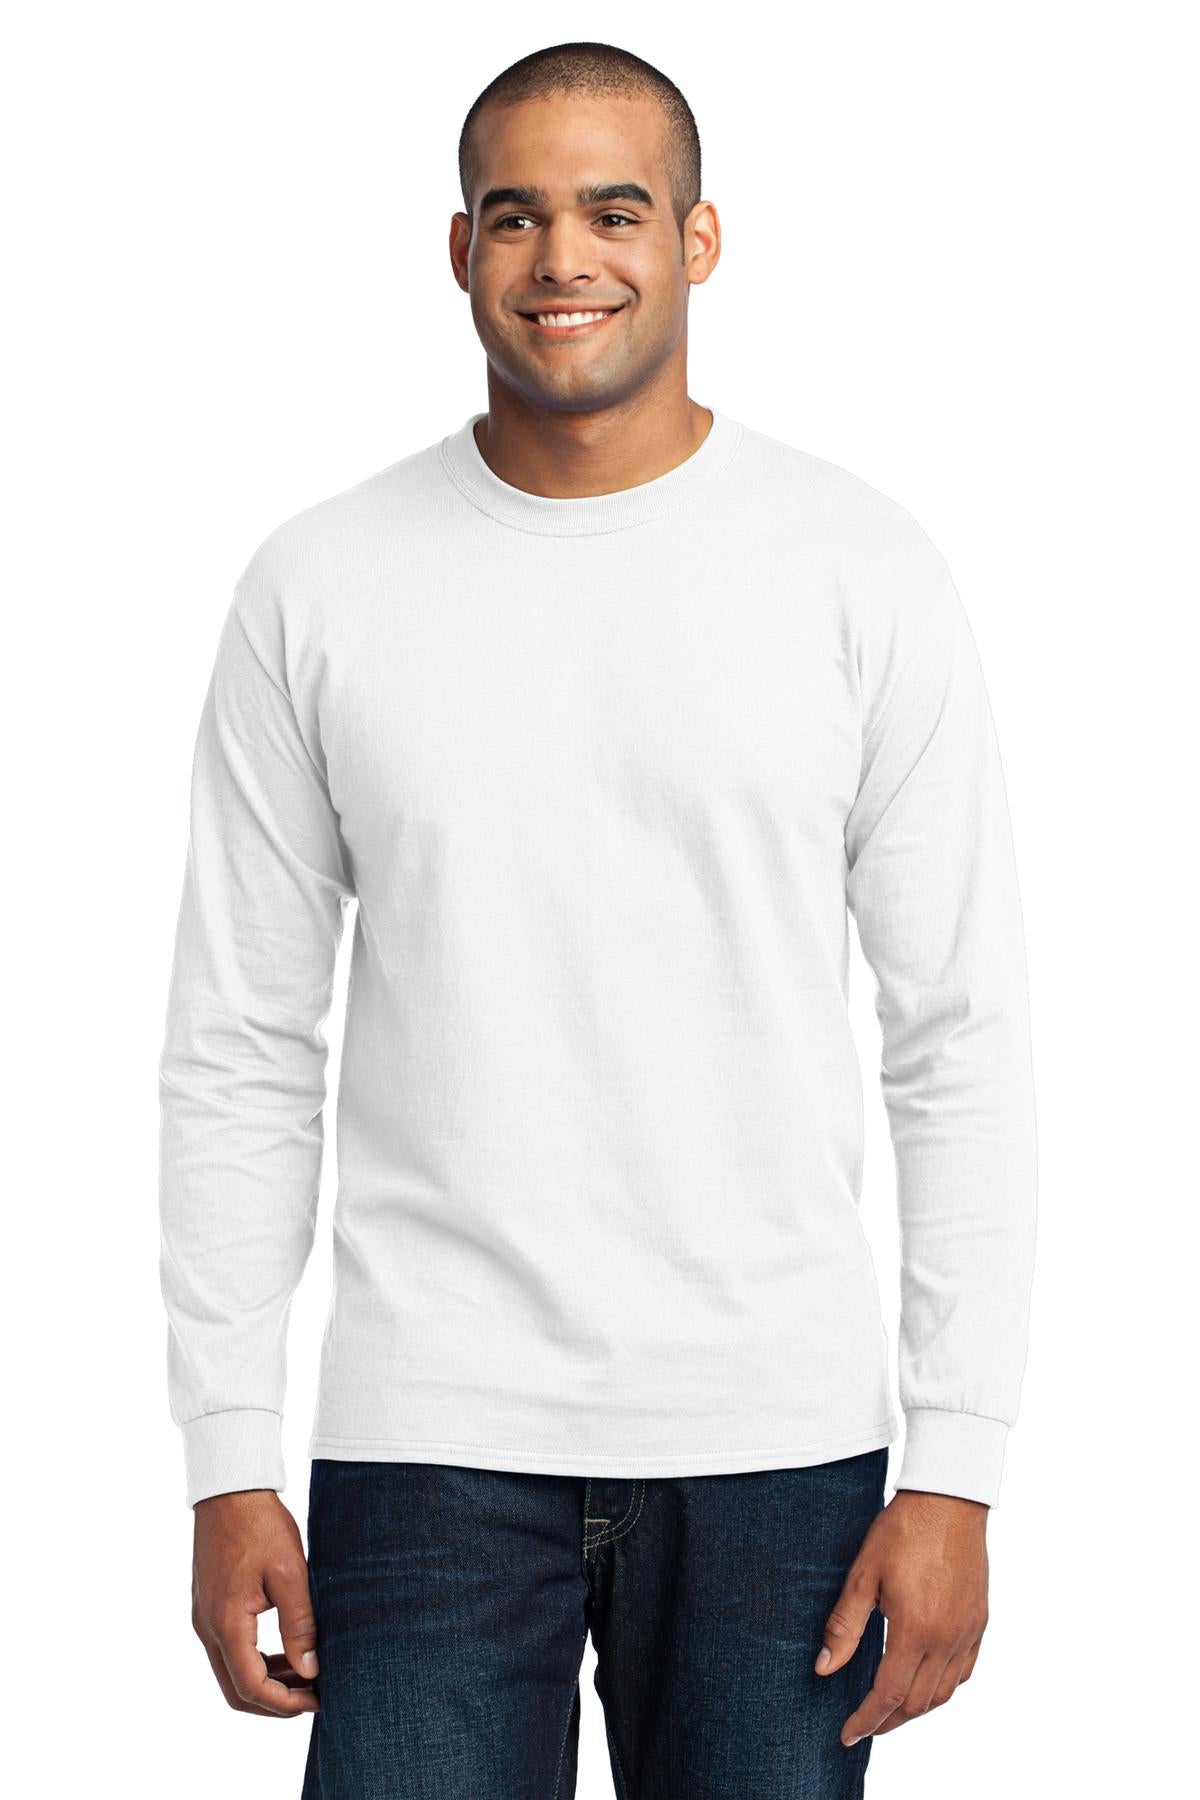 Swaasi Core - P&C® 5.5 oz 50/50 TALL LONG-SLEEVE T-Shirt with Print Logo